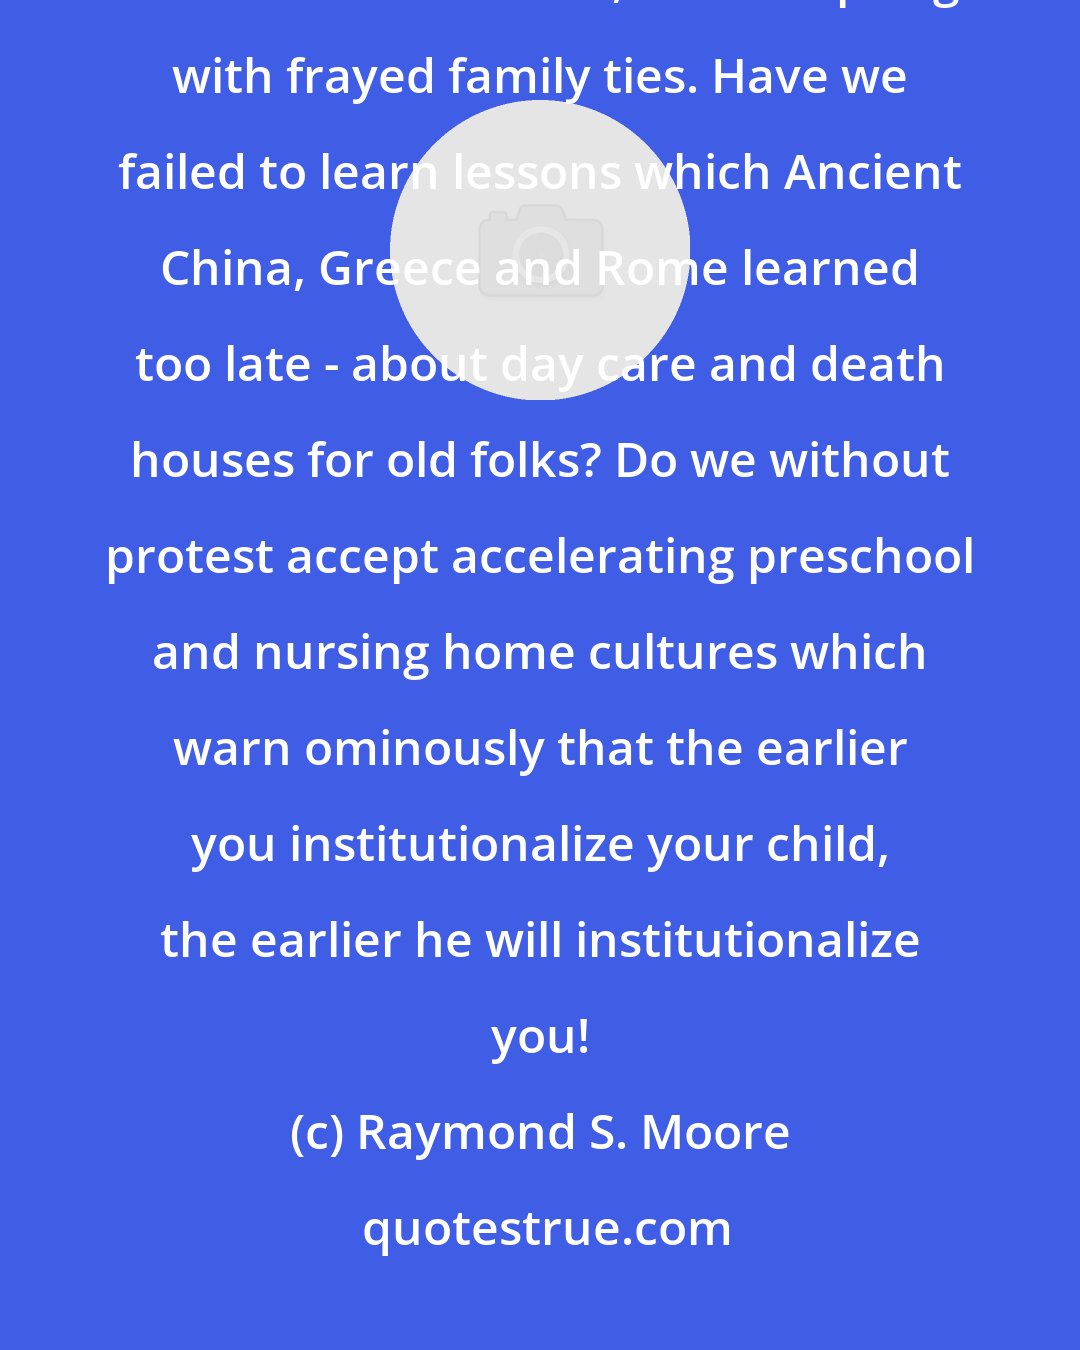 Raymond S. Moore: Great cycles of history began with vigorous cultures awakening to the needs of children, but collapsing with frayed family ties. Have we failed to learn lessons which Ancient China, Greece and Rome learned too late - about day care and death houses for old folks? Do we without protest accept accelerating preschool and nursing home cultures which warn ominously that the earlier you institutionalize your child, the earlier he will institutionalize you!